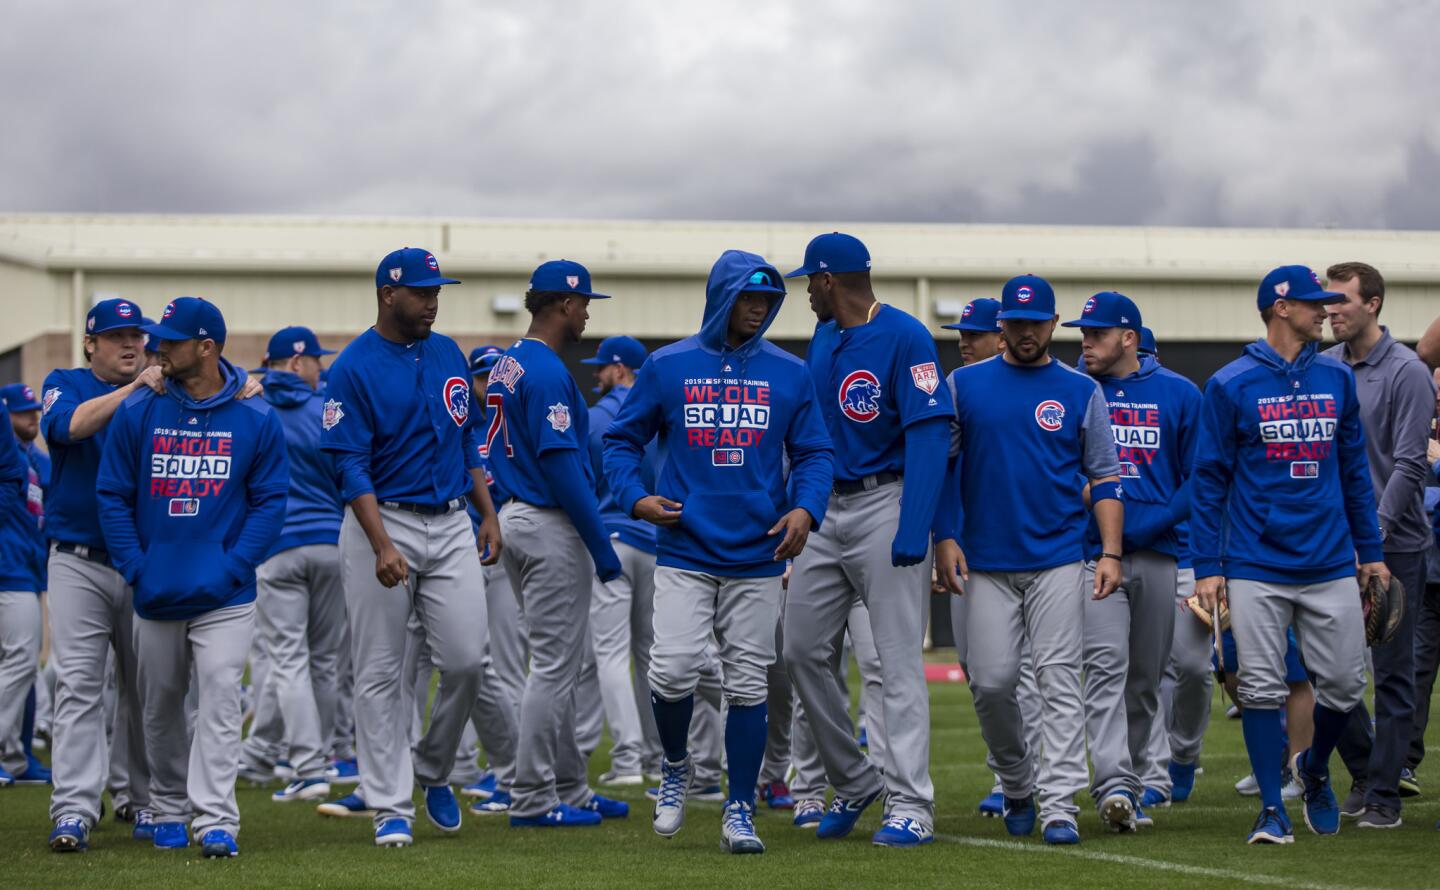 Cubs spring training